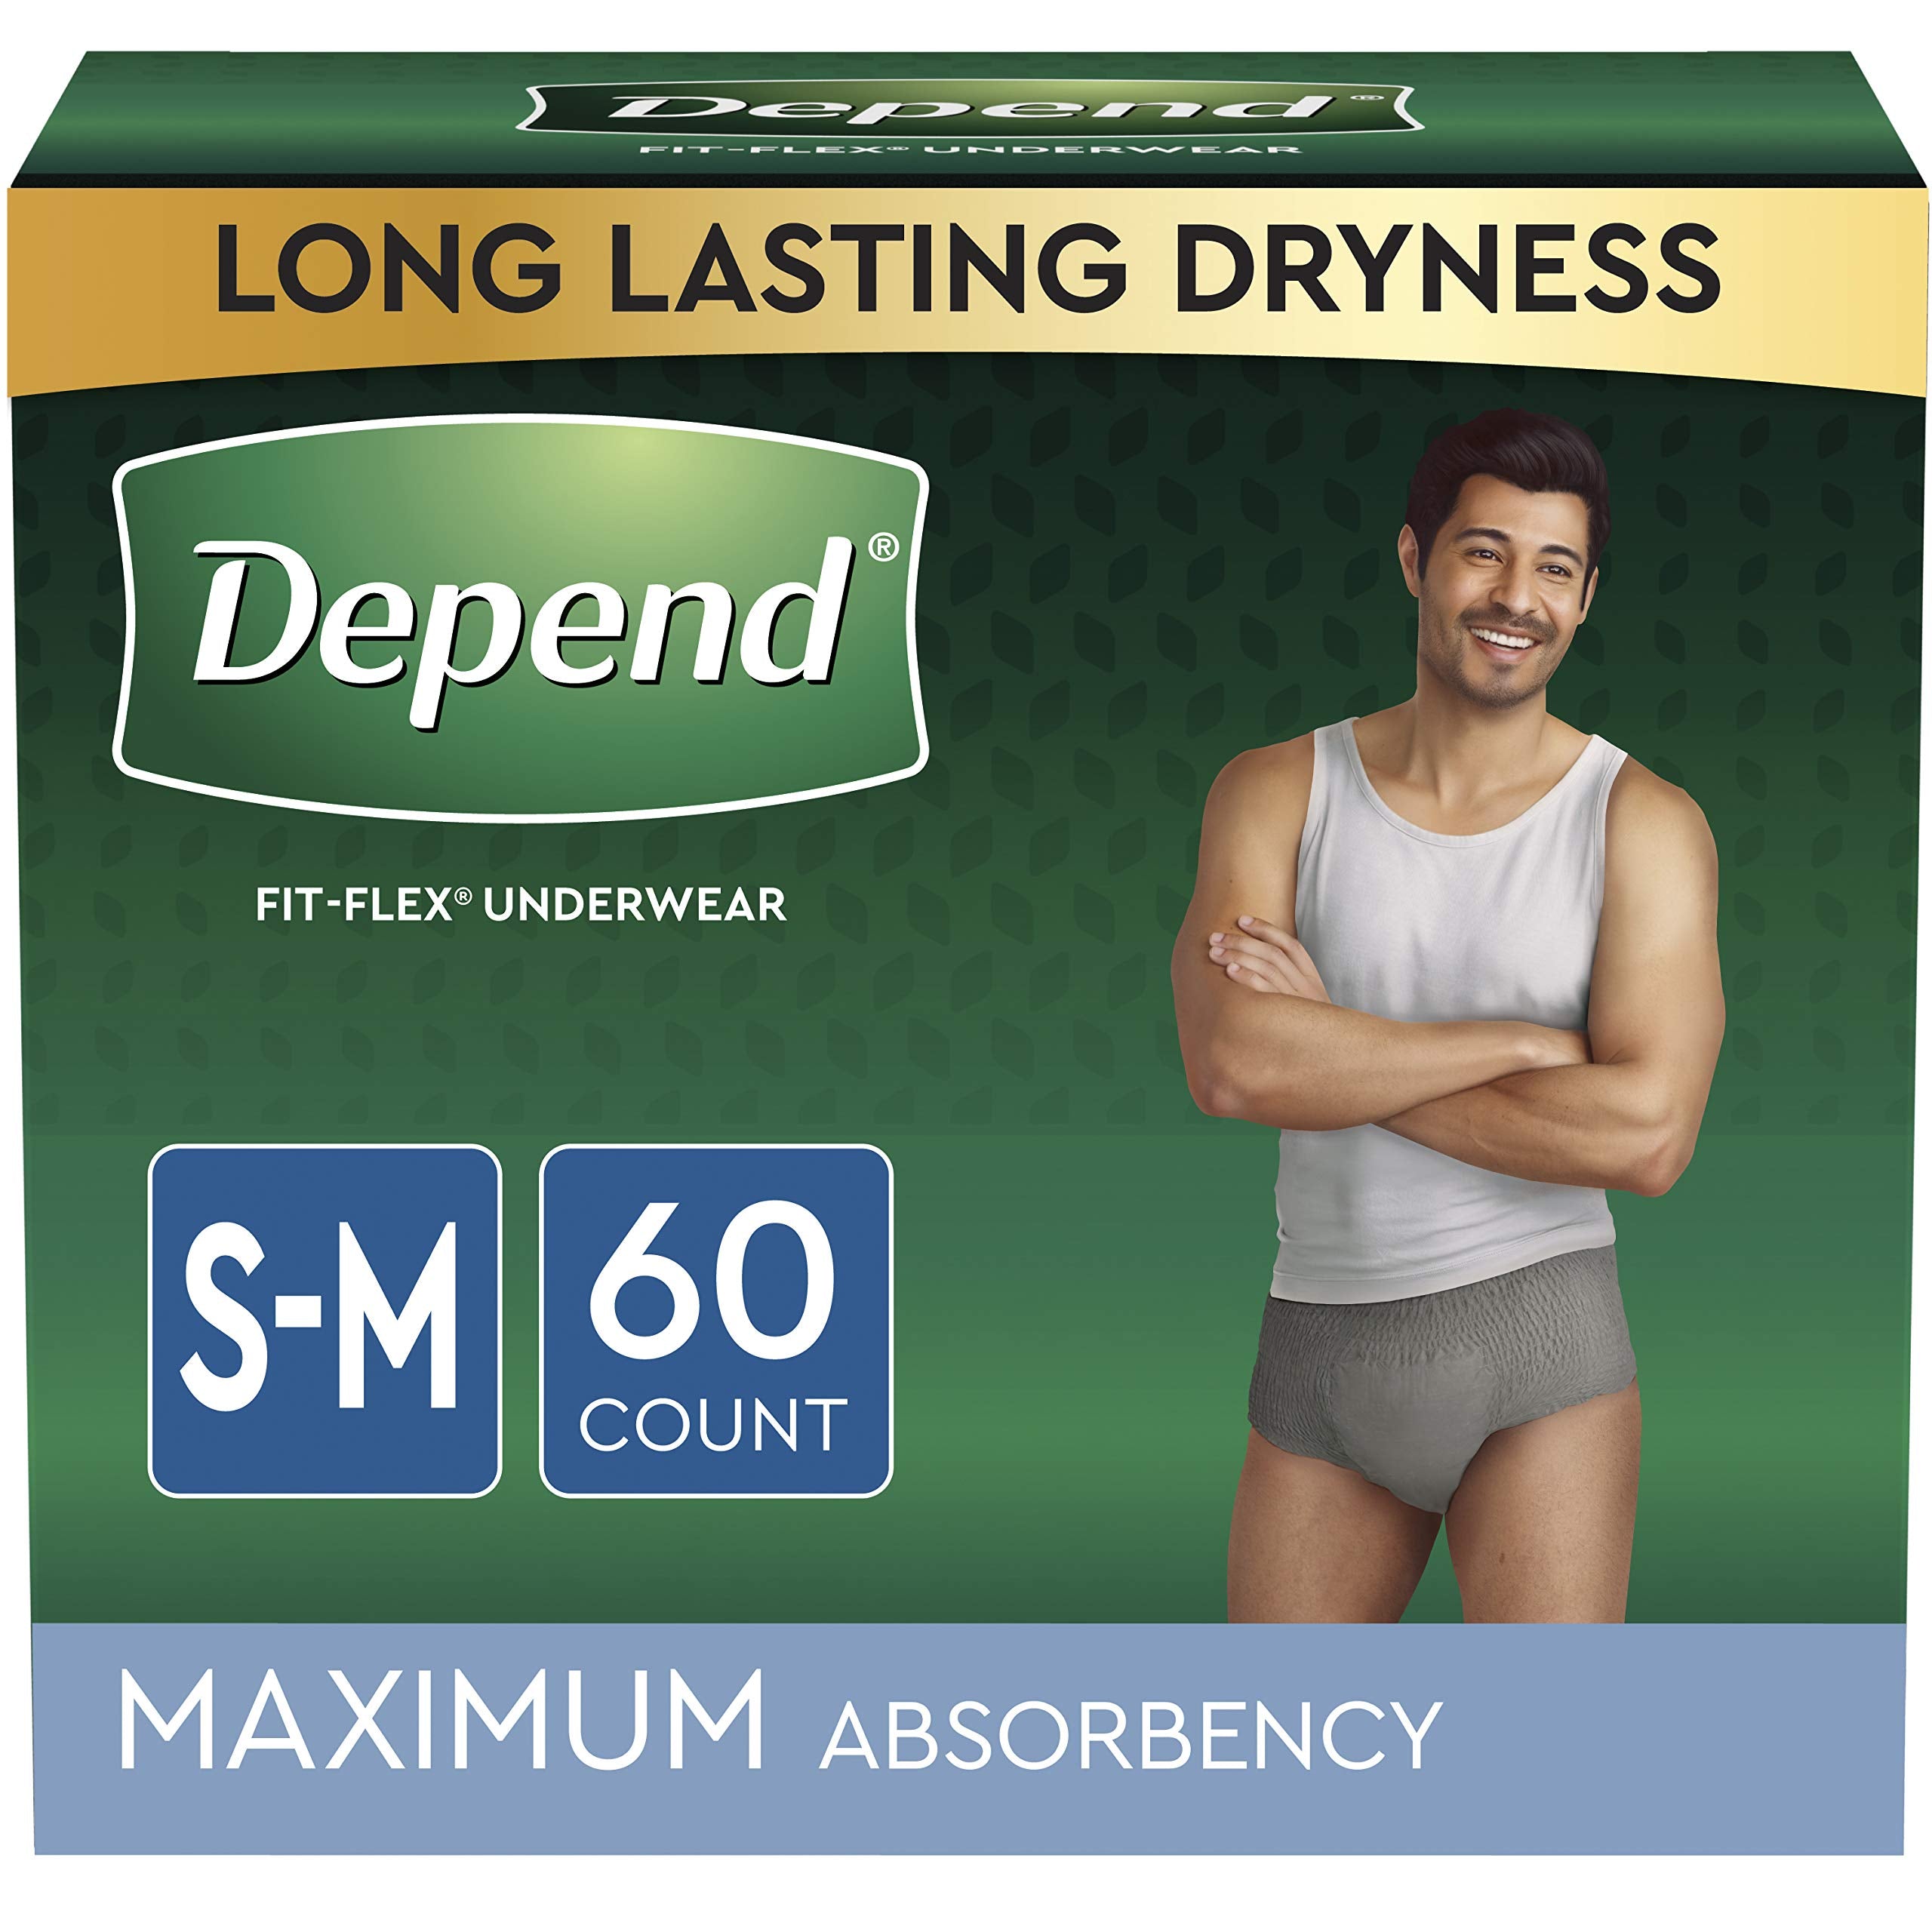 Depend FIT-FLEX Incontinence Underwear for Men, Maximum Absorbency, Disposable, Small/Medium, Grey, 60 Count (2 Packs of 30) (Packaging May Vary)